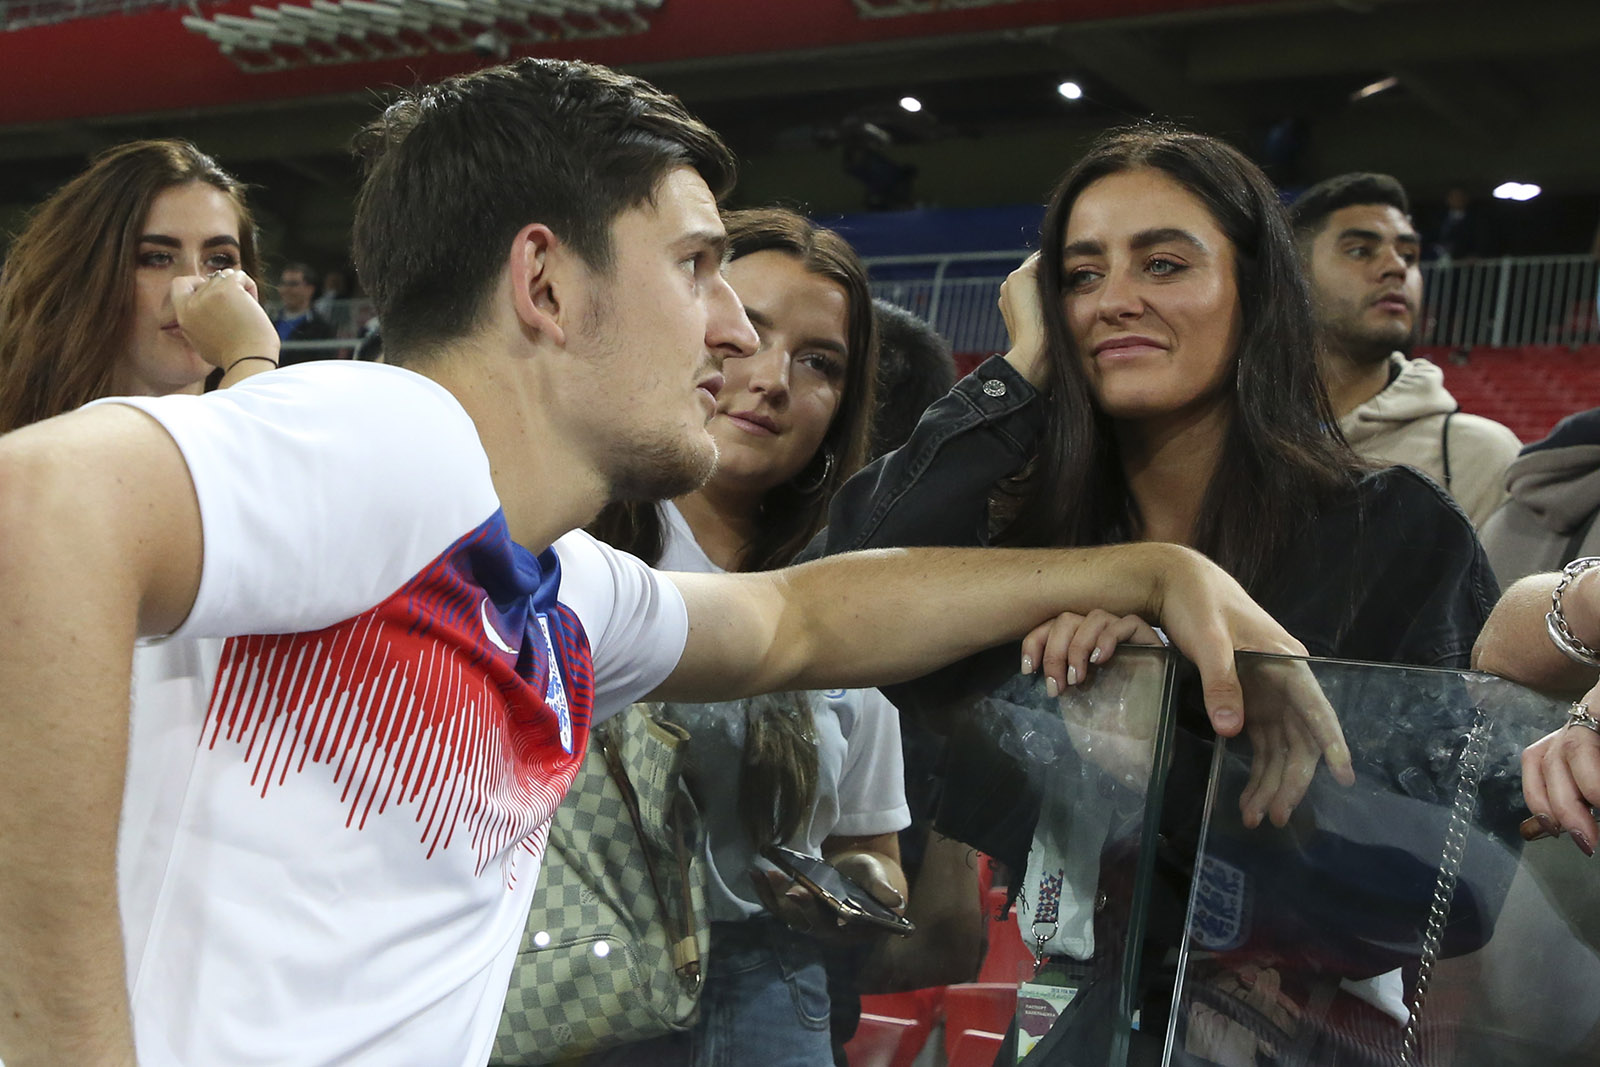 England player Harry Maguire talking to his fiancée Fern Hawkins after the game against Colombia at Spartak Stadium, Moscow, Russia, July 3, 2018